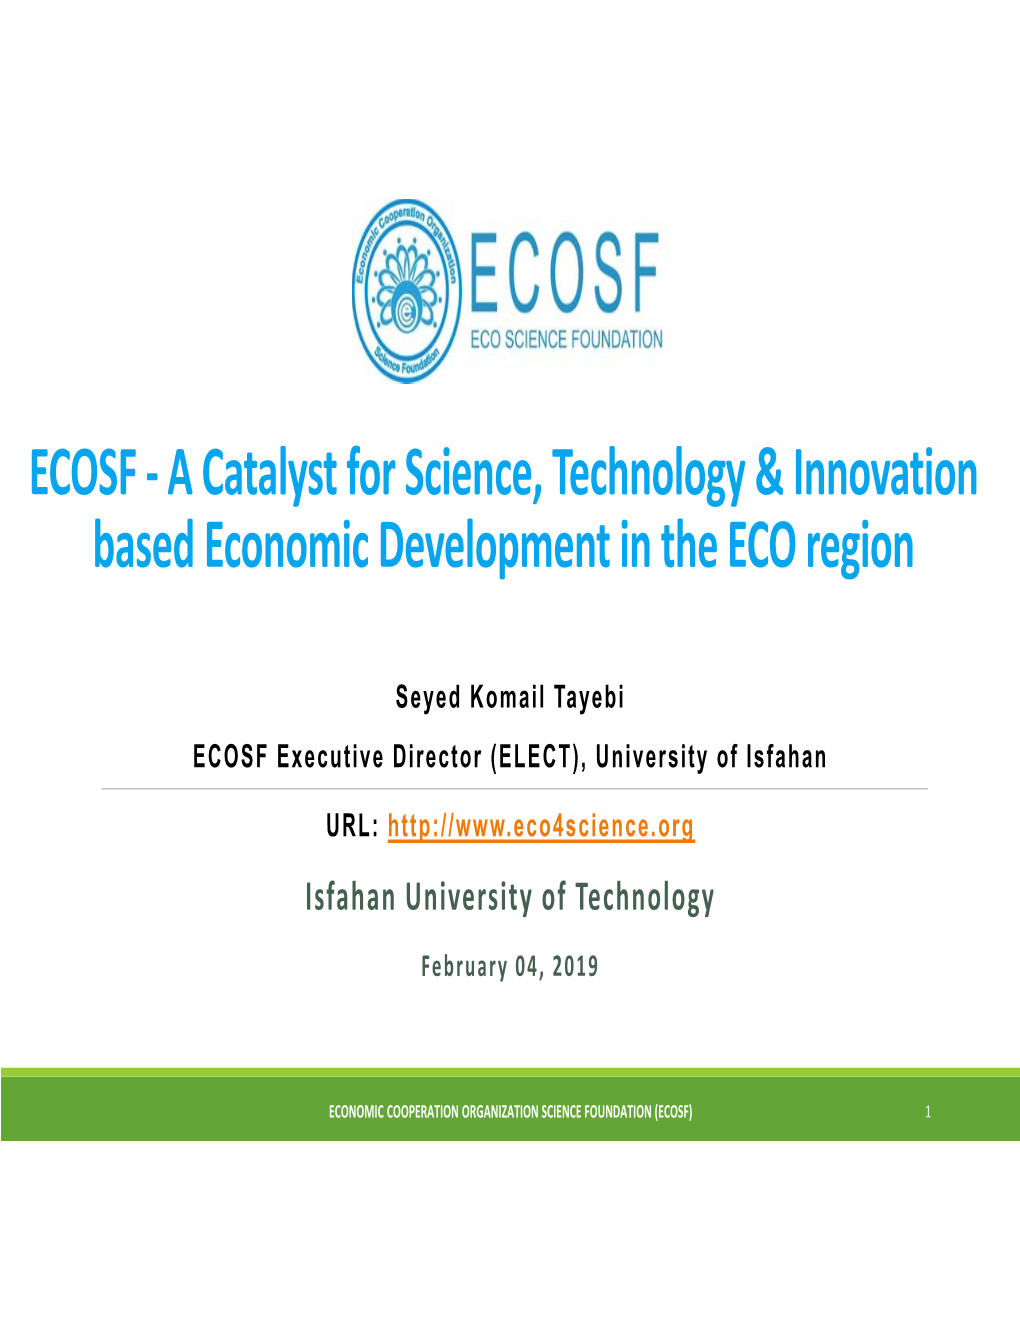 ECOSF ‐ a Catalyst for Science, Technology & Innovation Based Economic Development in the ECO Region